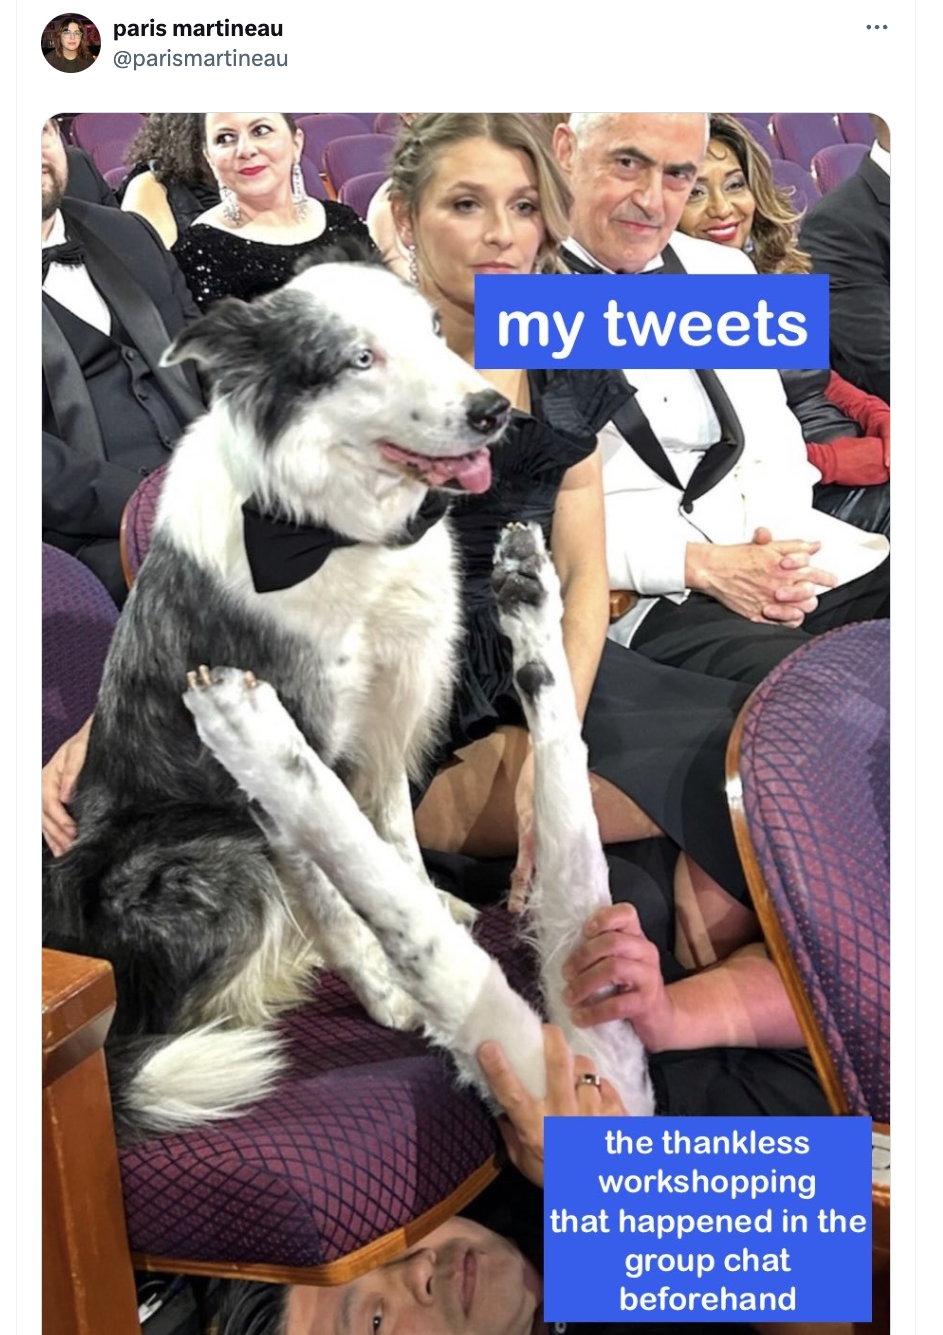 dog - paris martineau my tweets the thankless workshopping that happened in the group chat beforehand